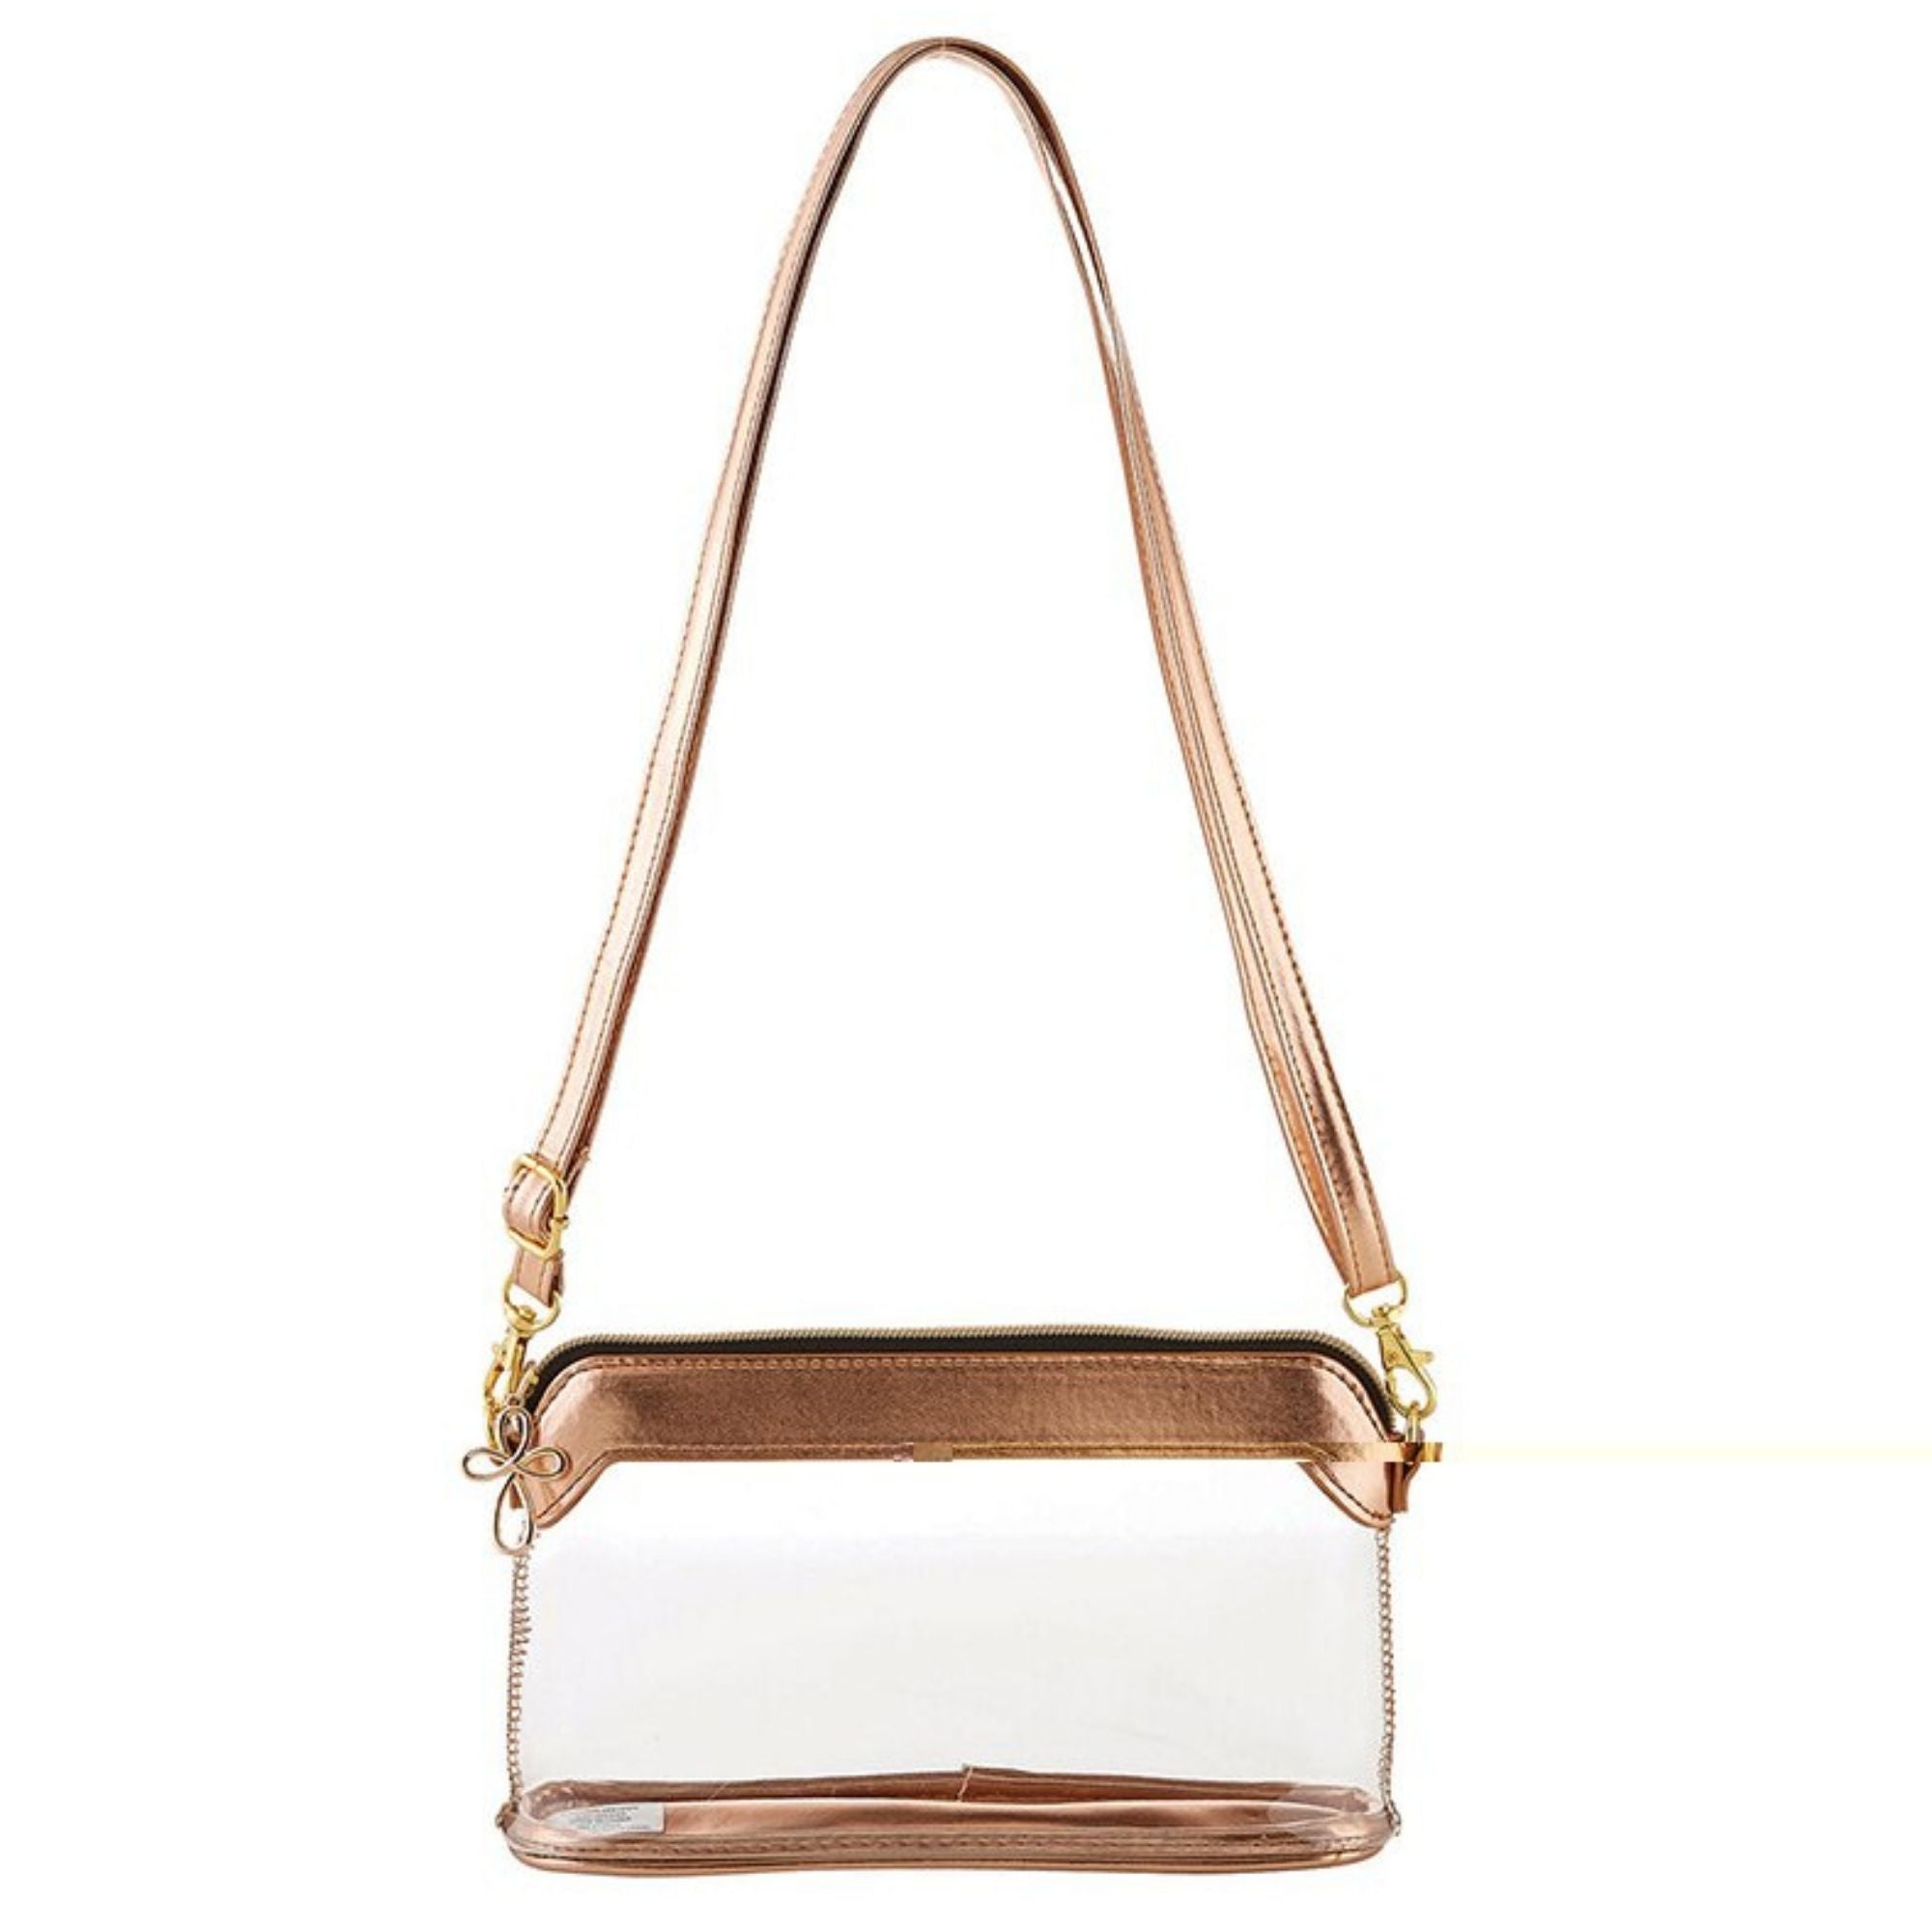 Buy Rose Gold Purse Online In India - Etsy India